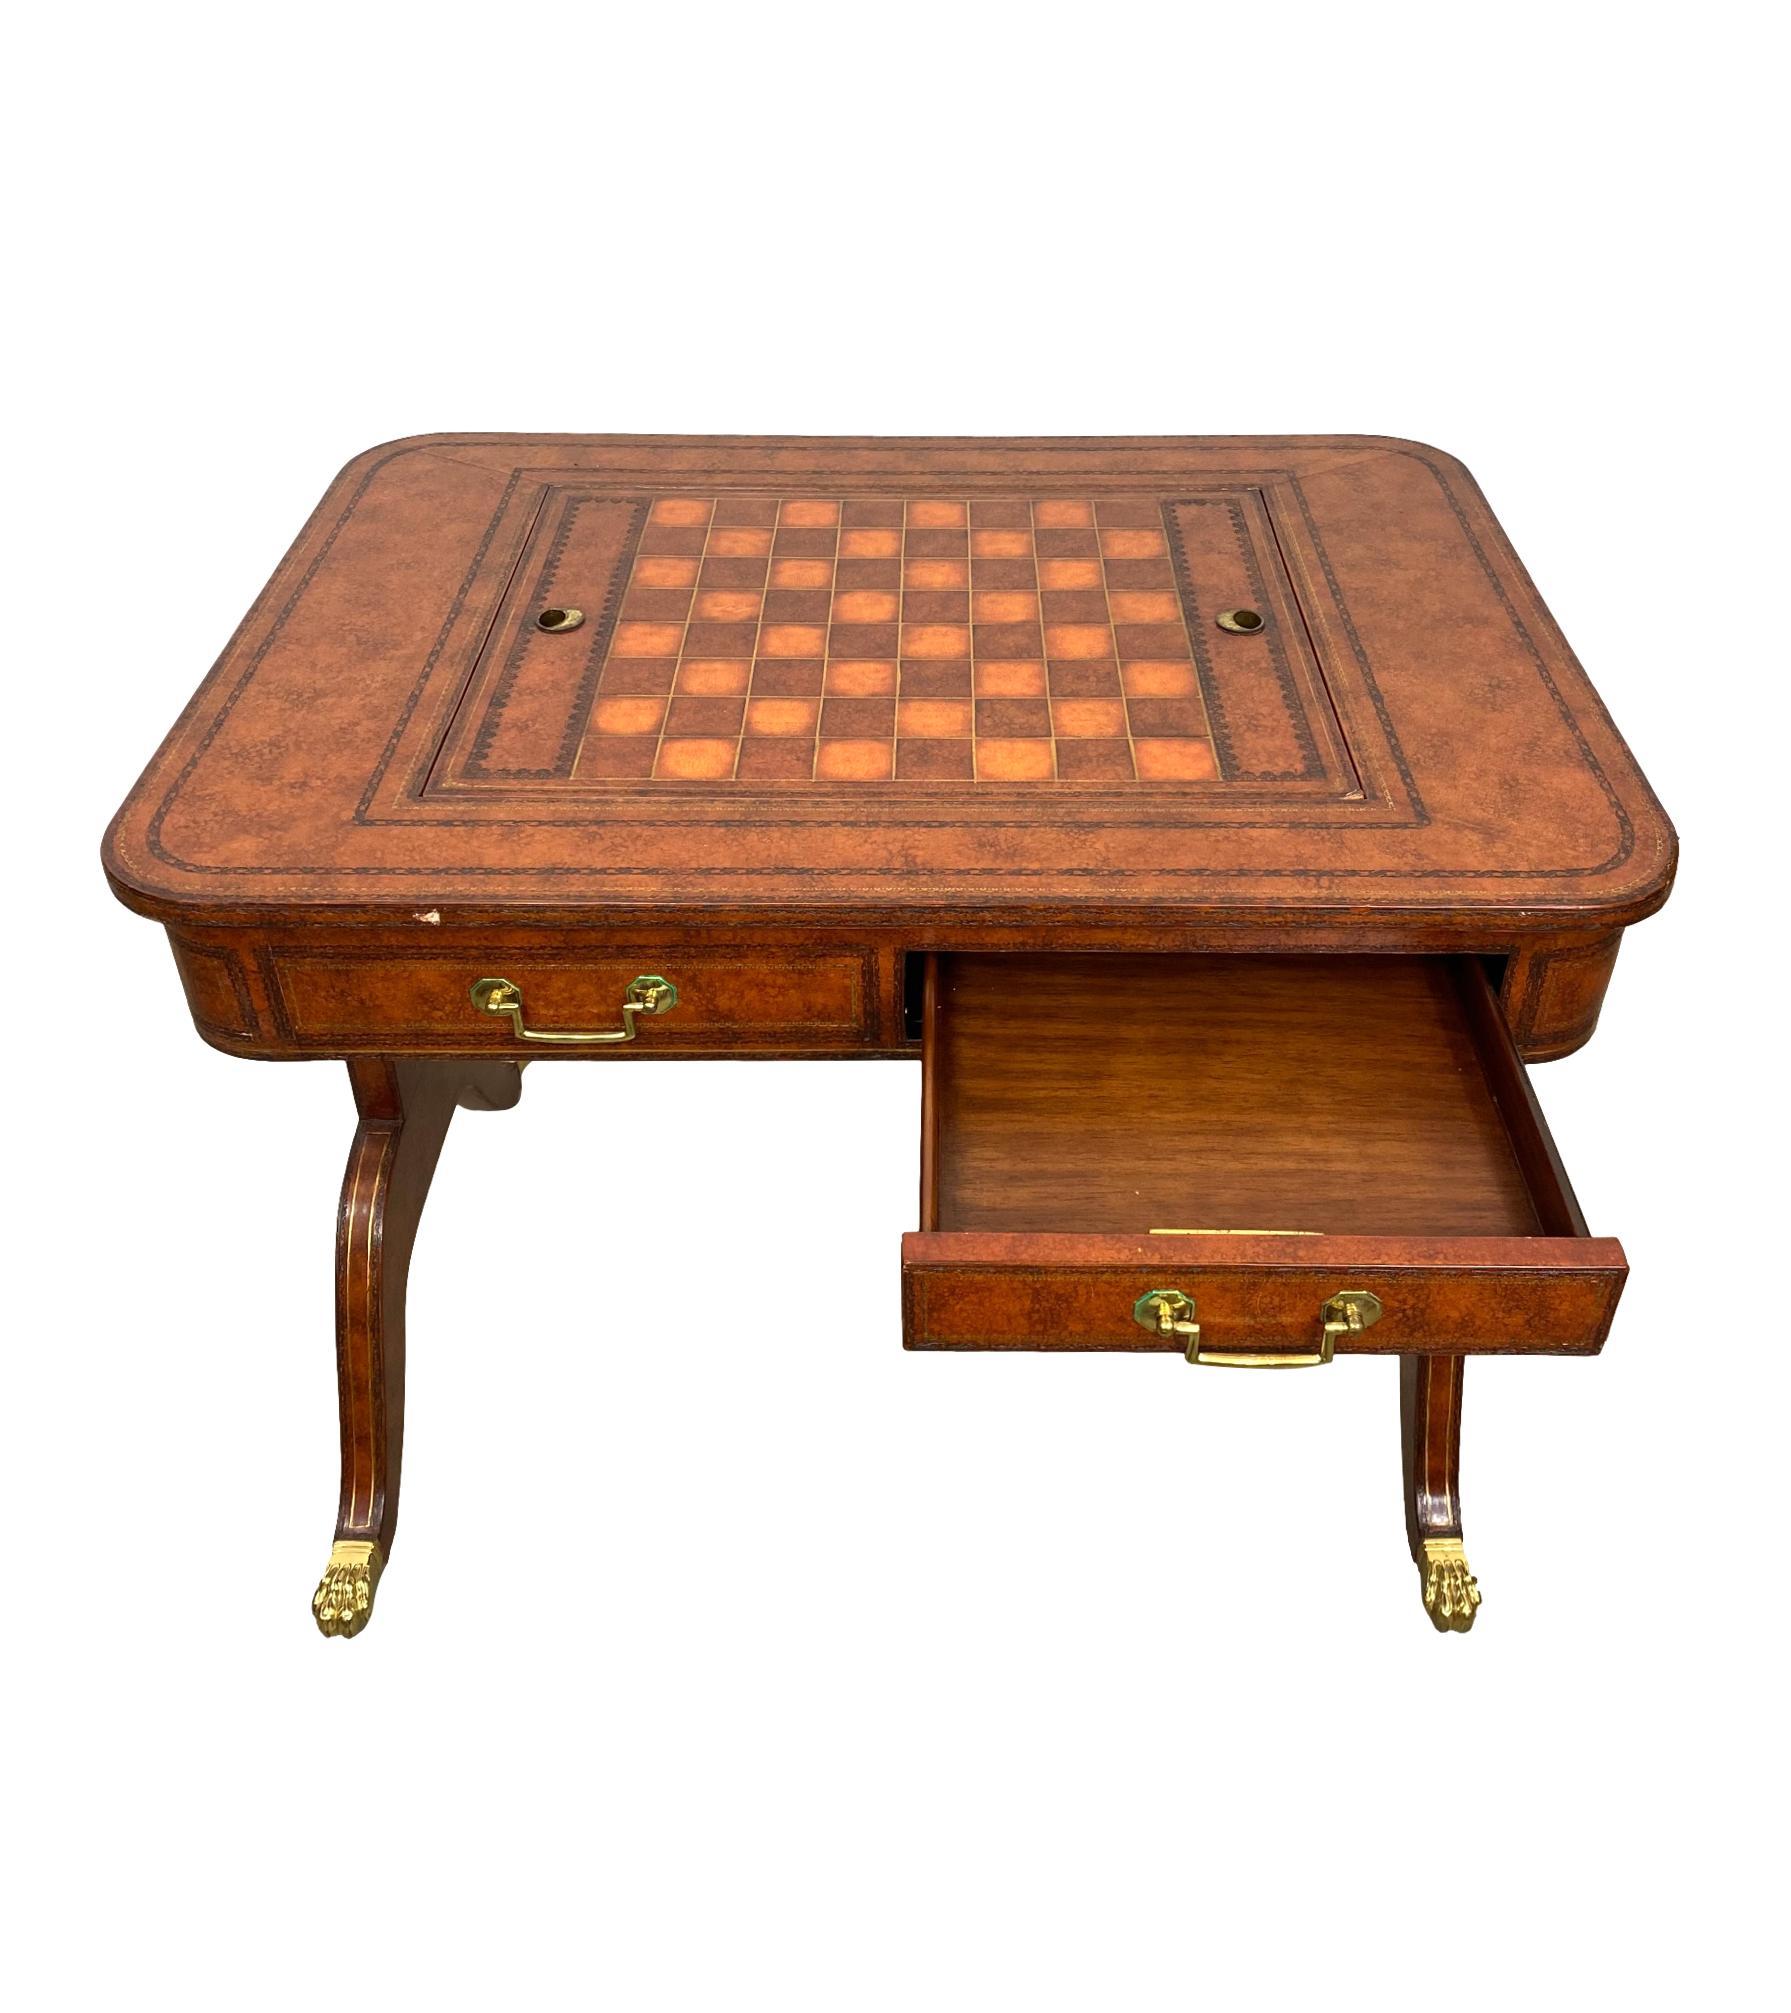 20th Century Maitland-Smith Regency-Style Chess/Backgammon Board Table in Embossed Leather